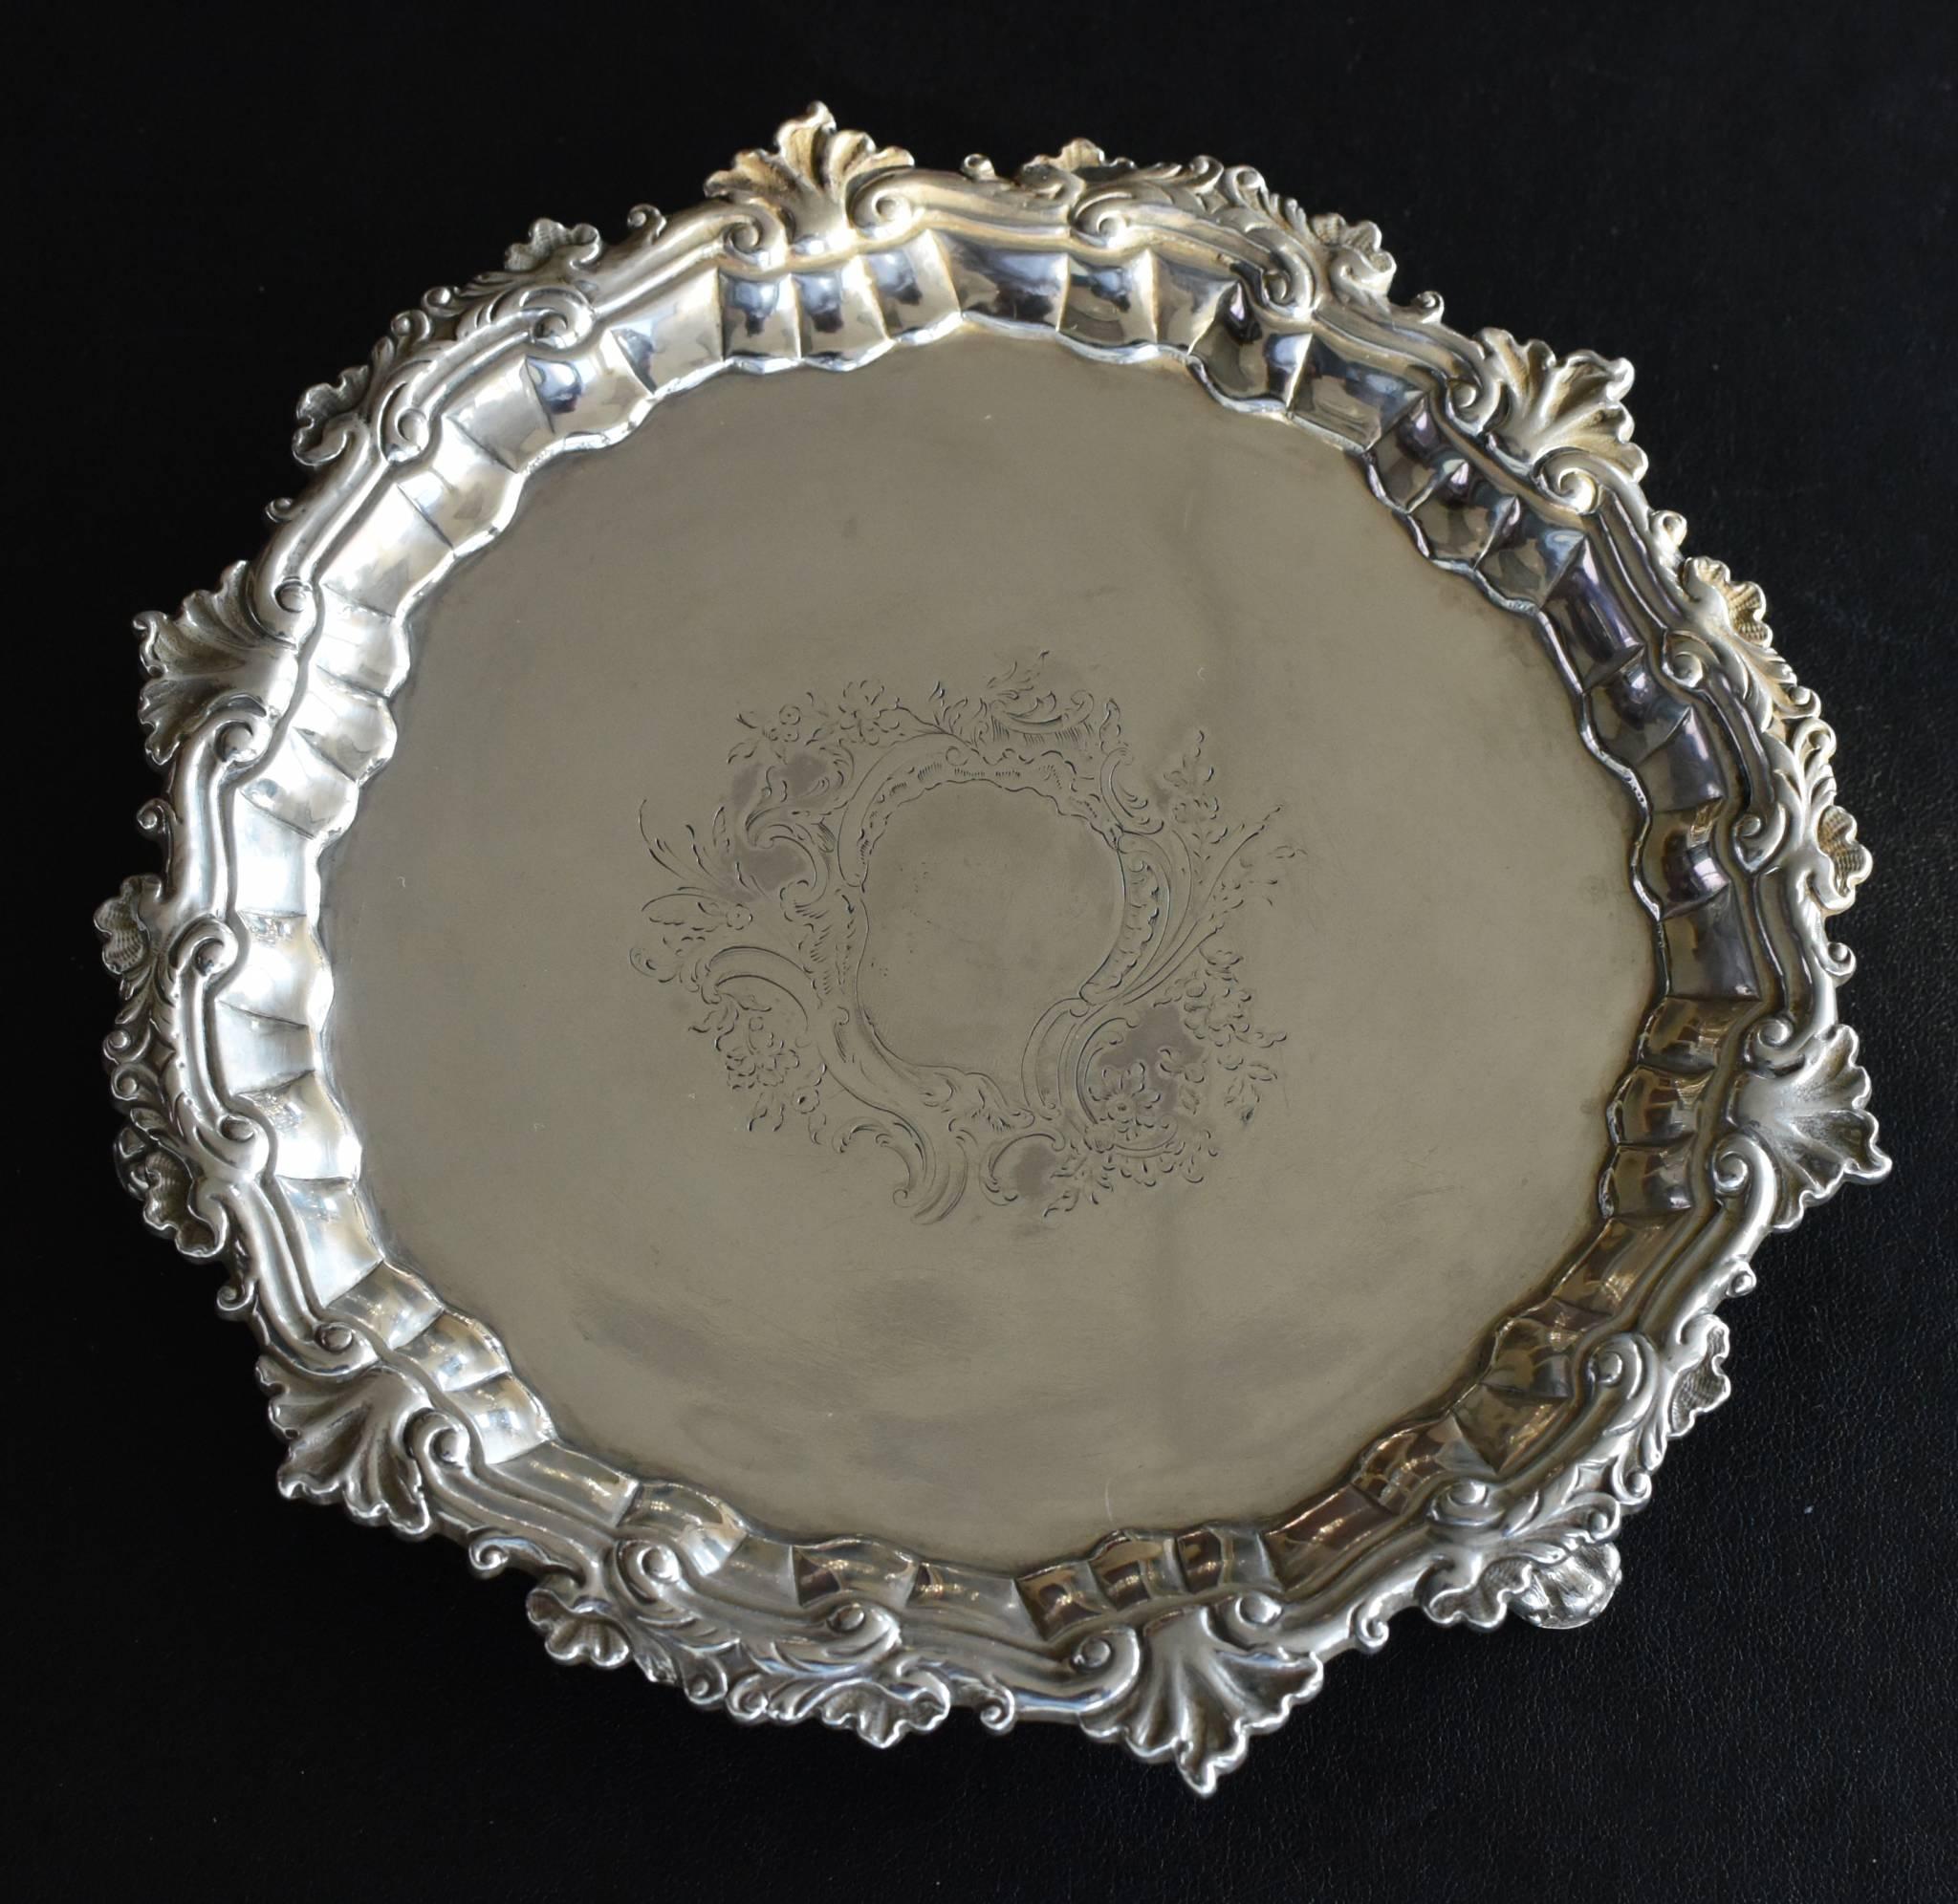 Antique George III Sterling Silver Salver (1747) - Art by Unknown